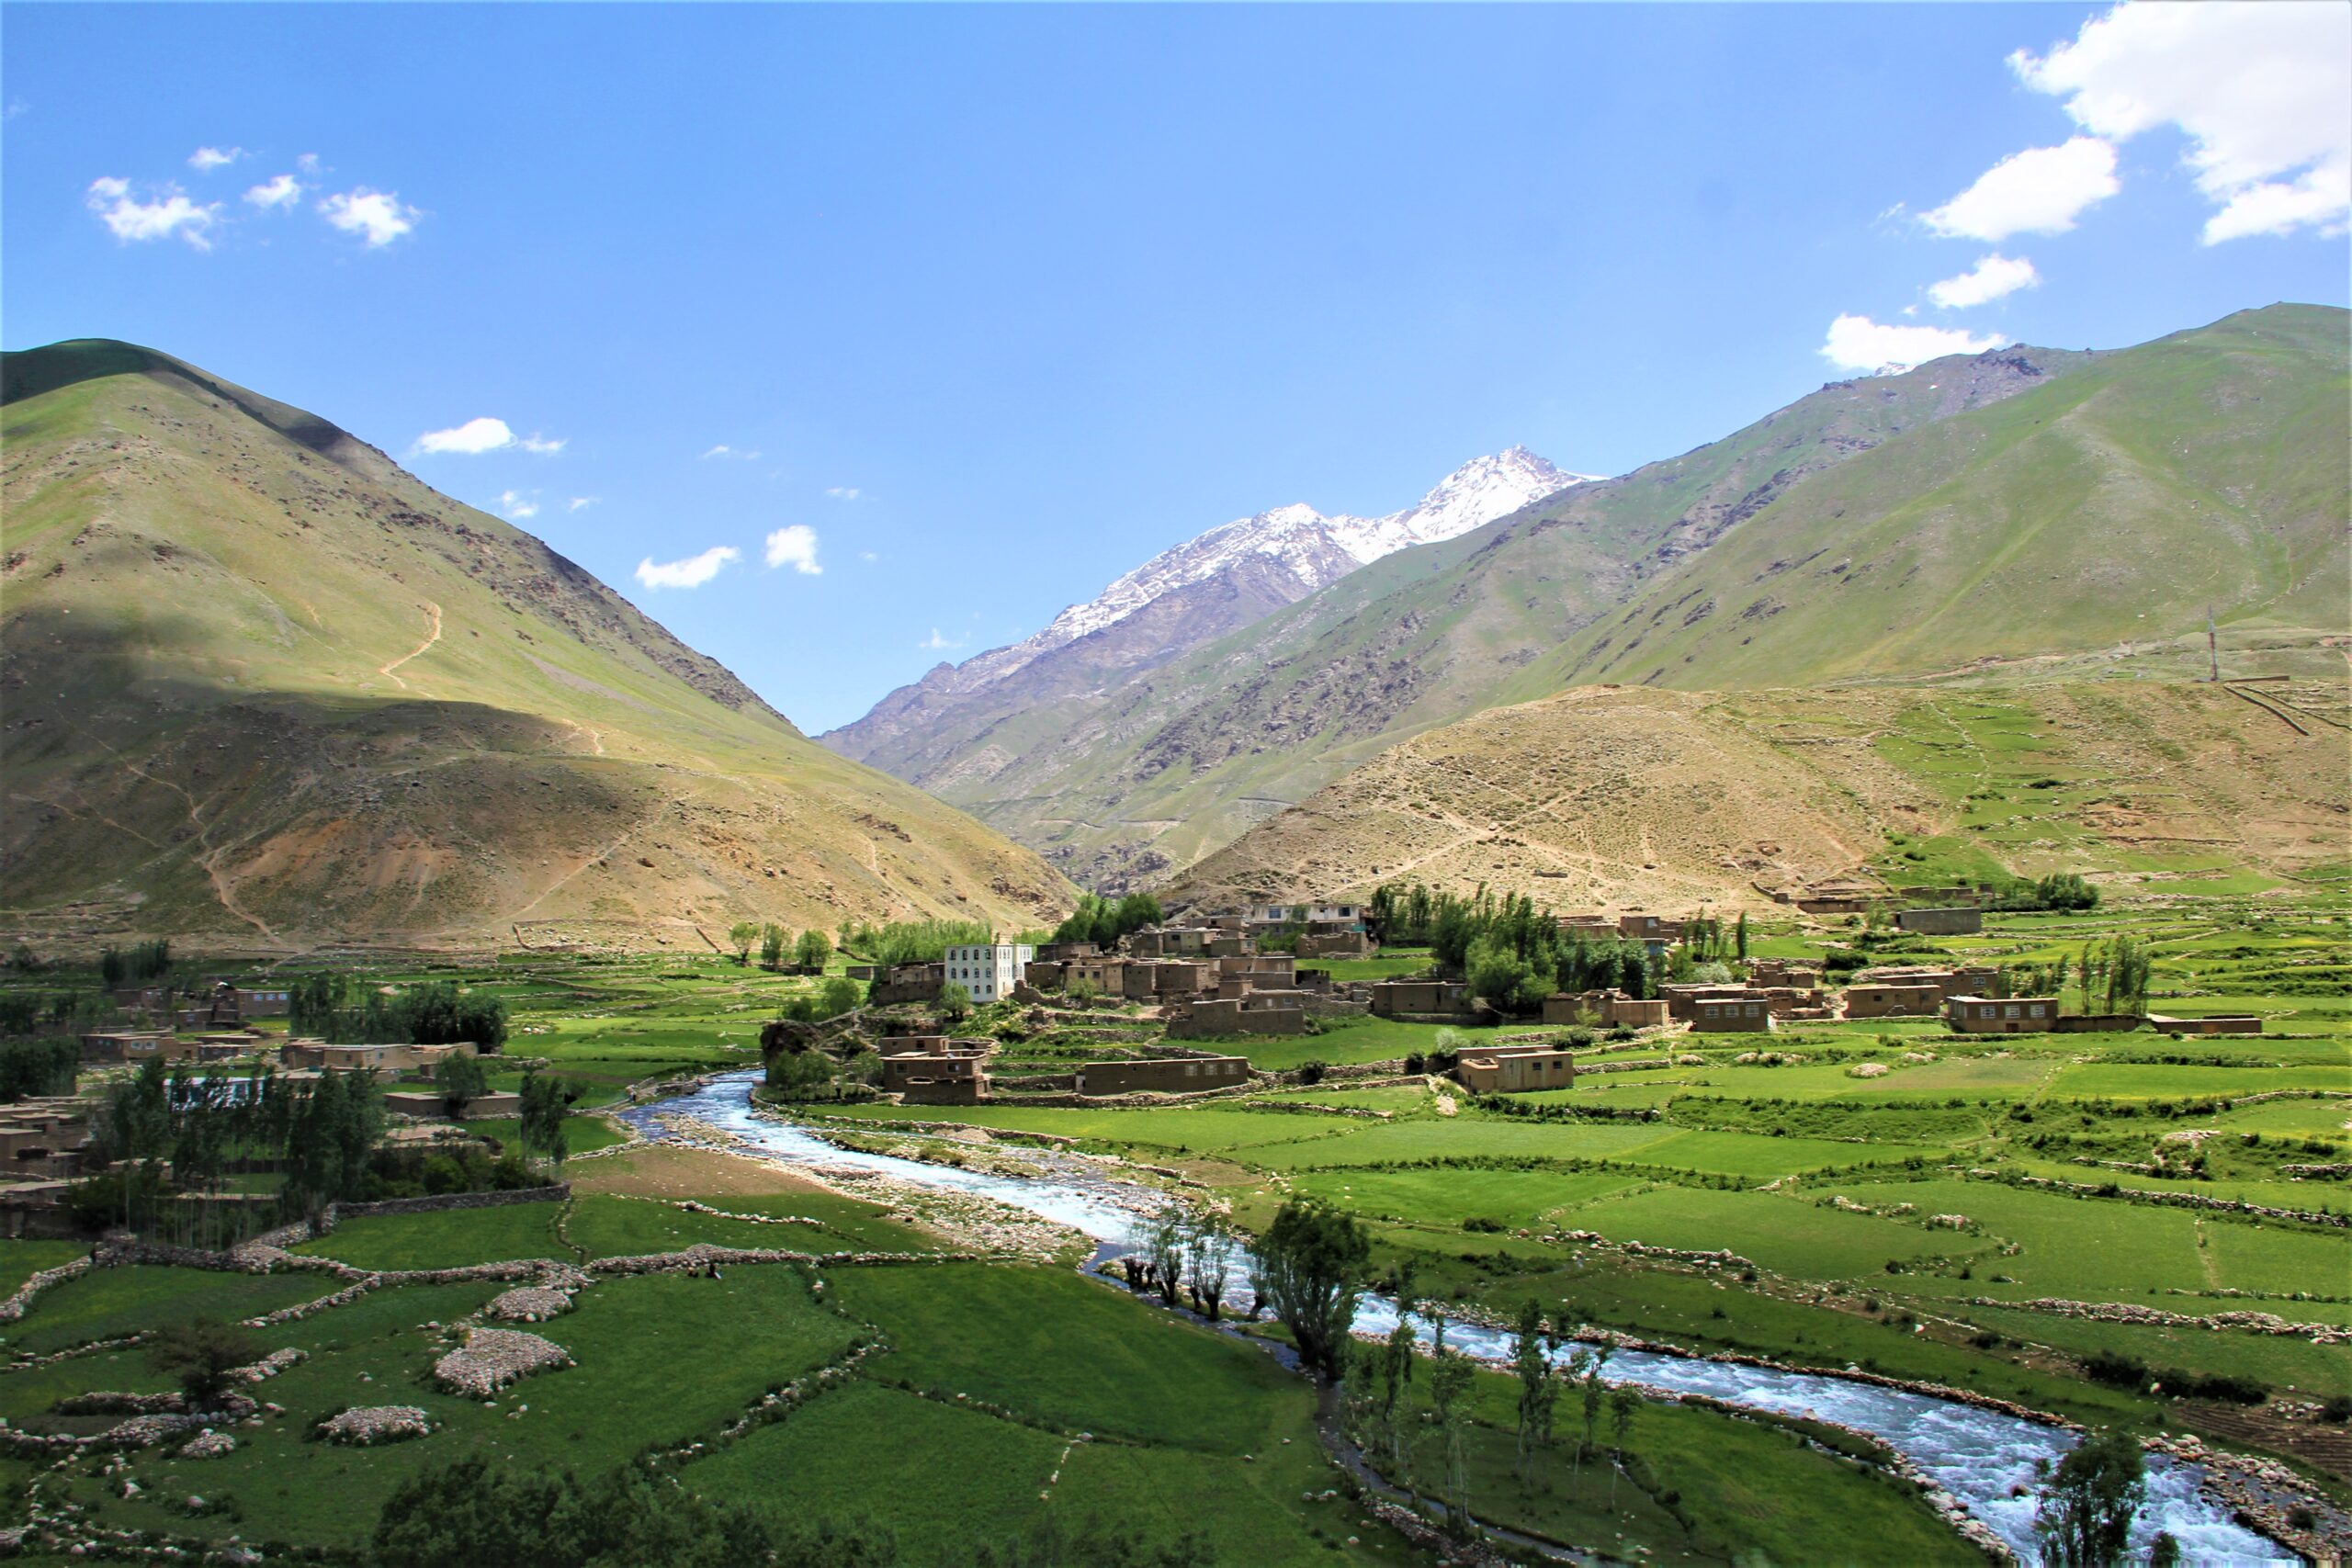 Photograph of green land, mountains and a bright blue sky.